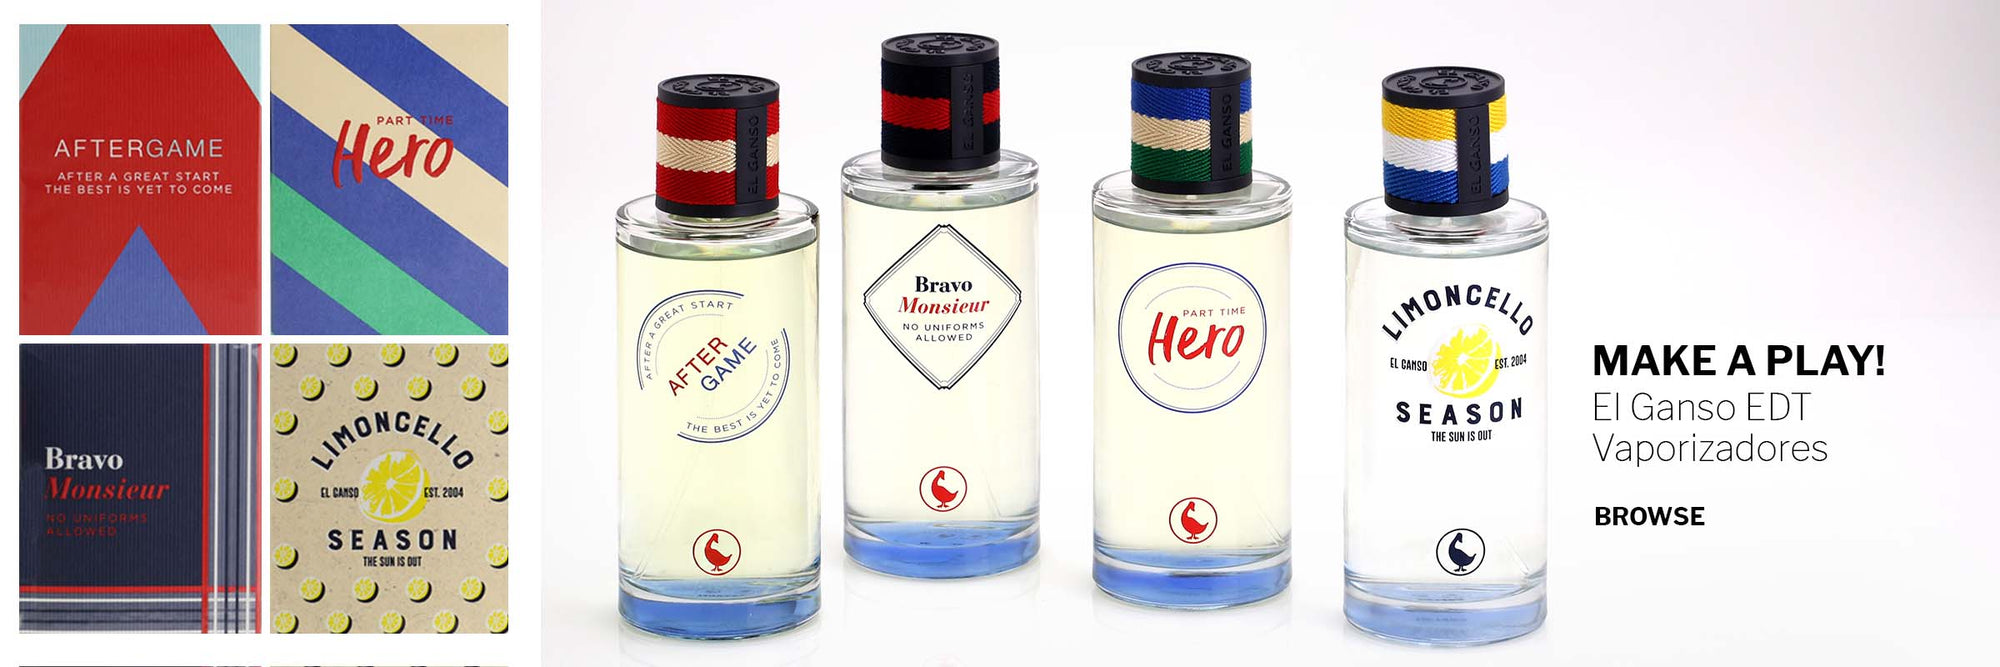 Make a Play! El Ganso Vaporizadores. Picture of scent bottles and square insets of the graphic packaging prints